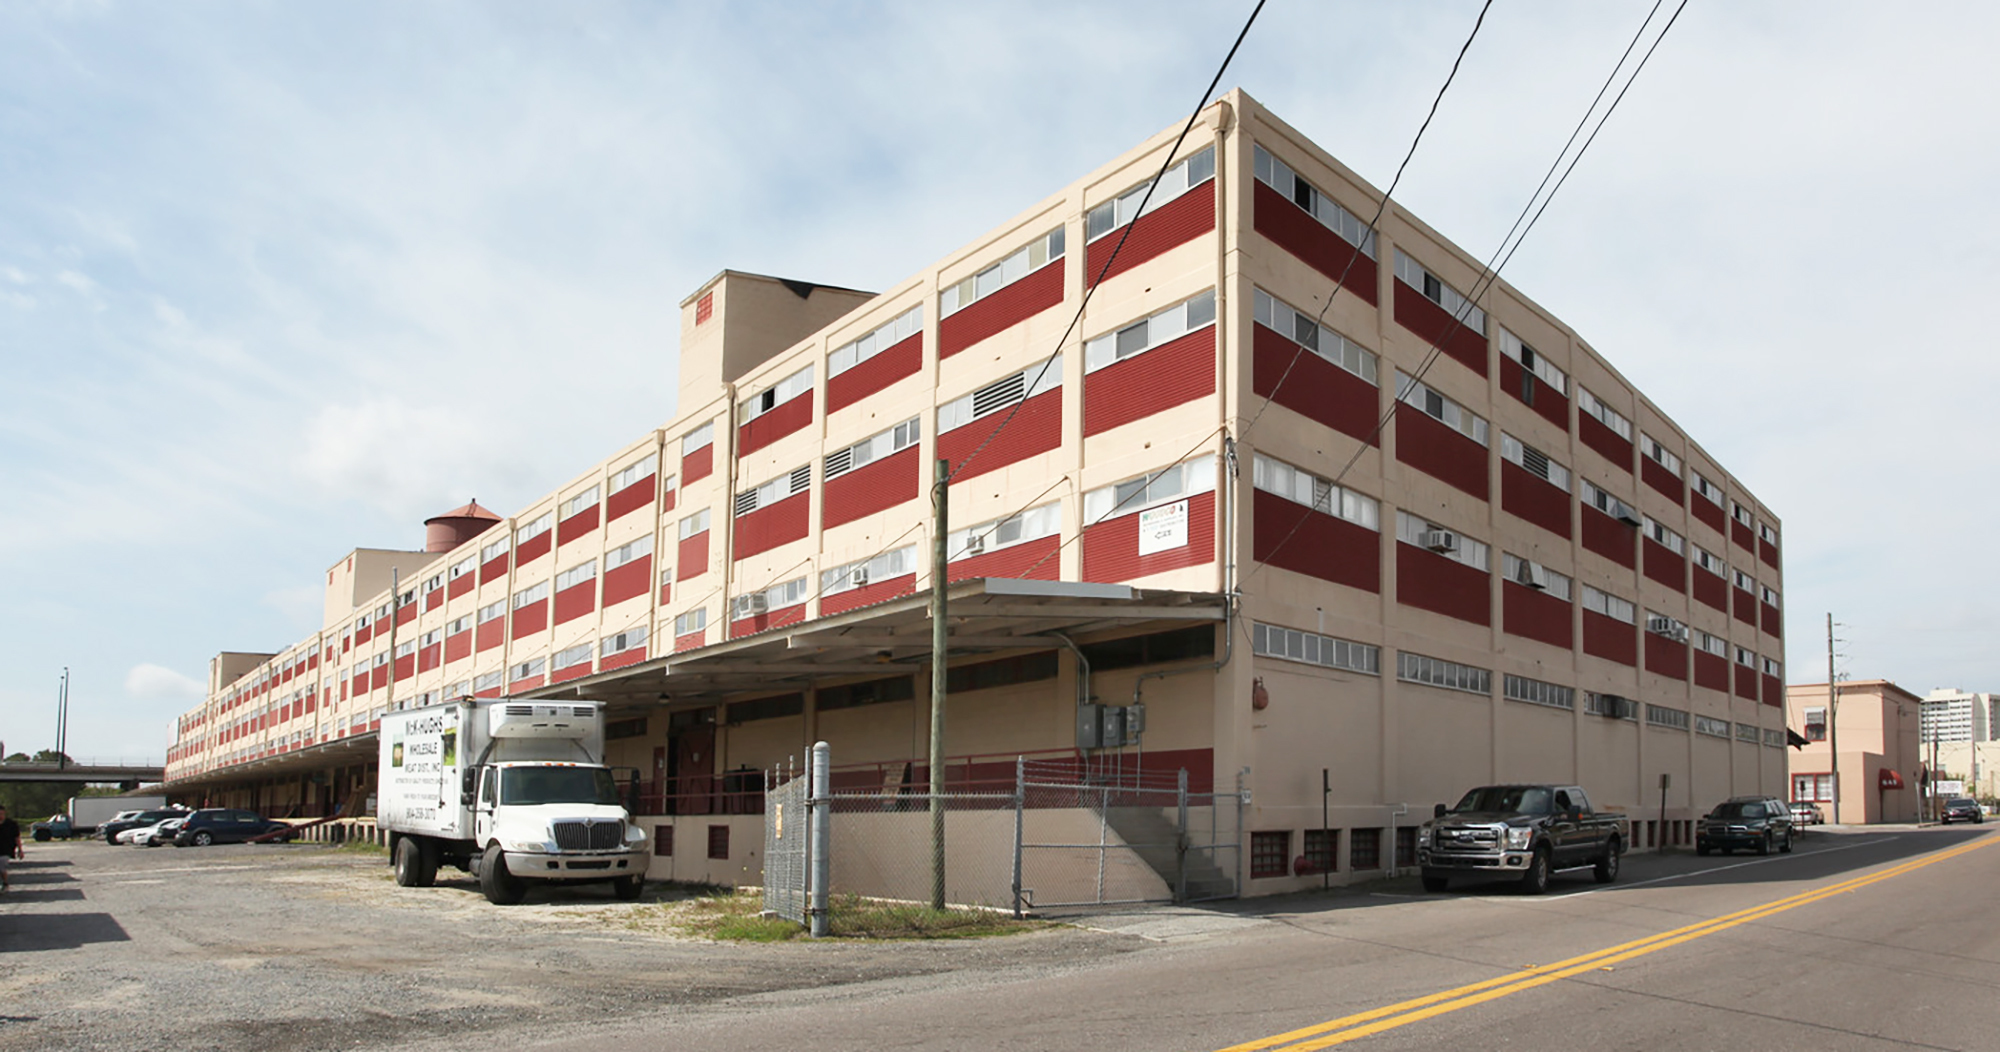 Columbia Ventures intends to convert the structure into apartments through adaptive reuse and a historic tax credit conversion.